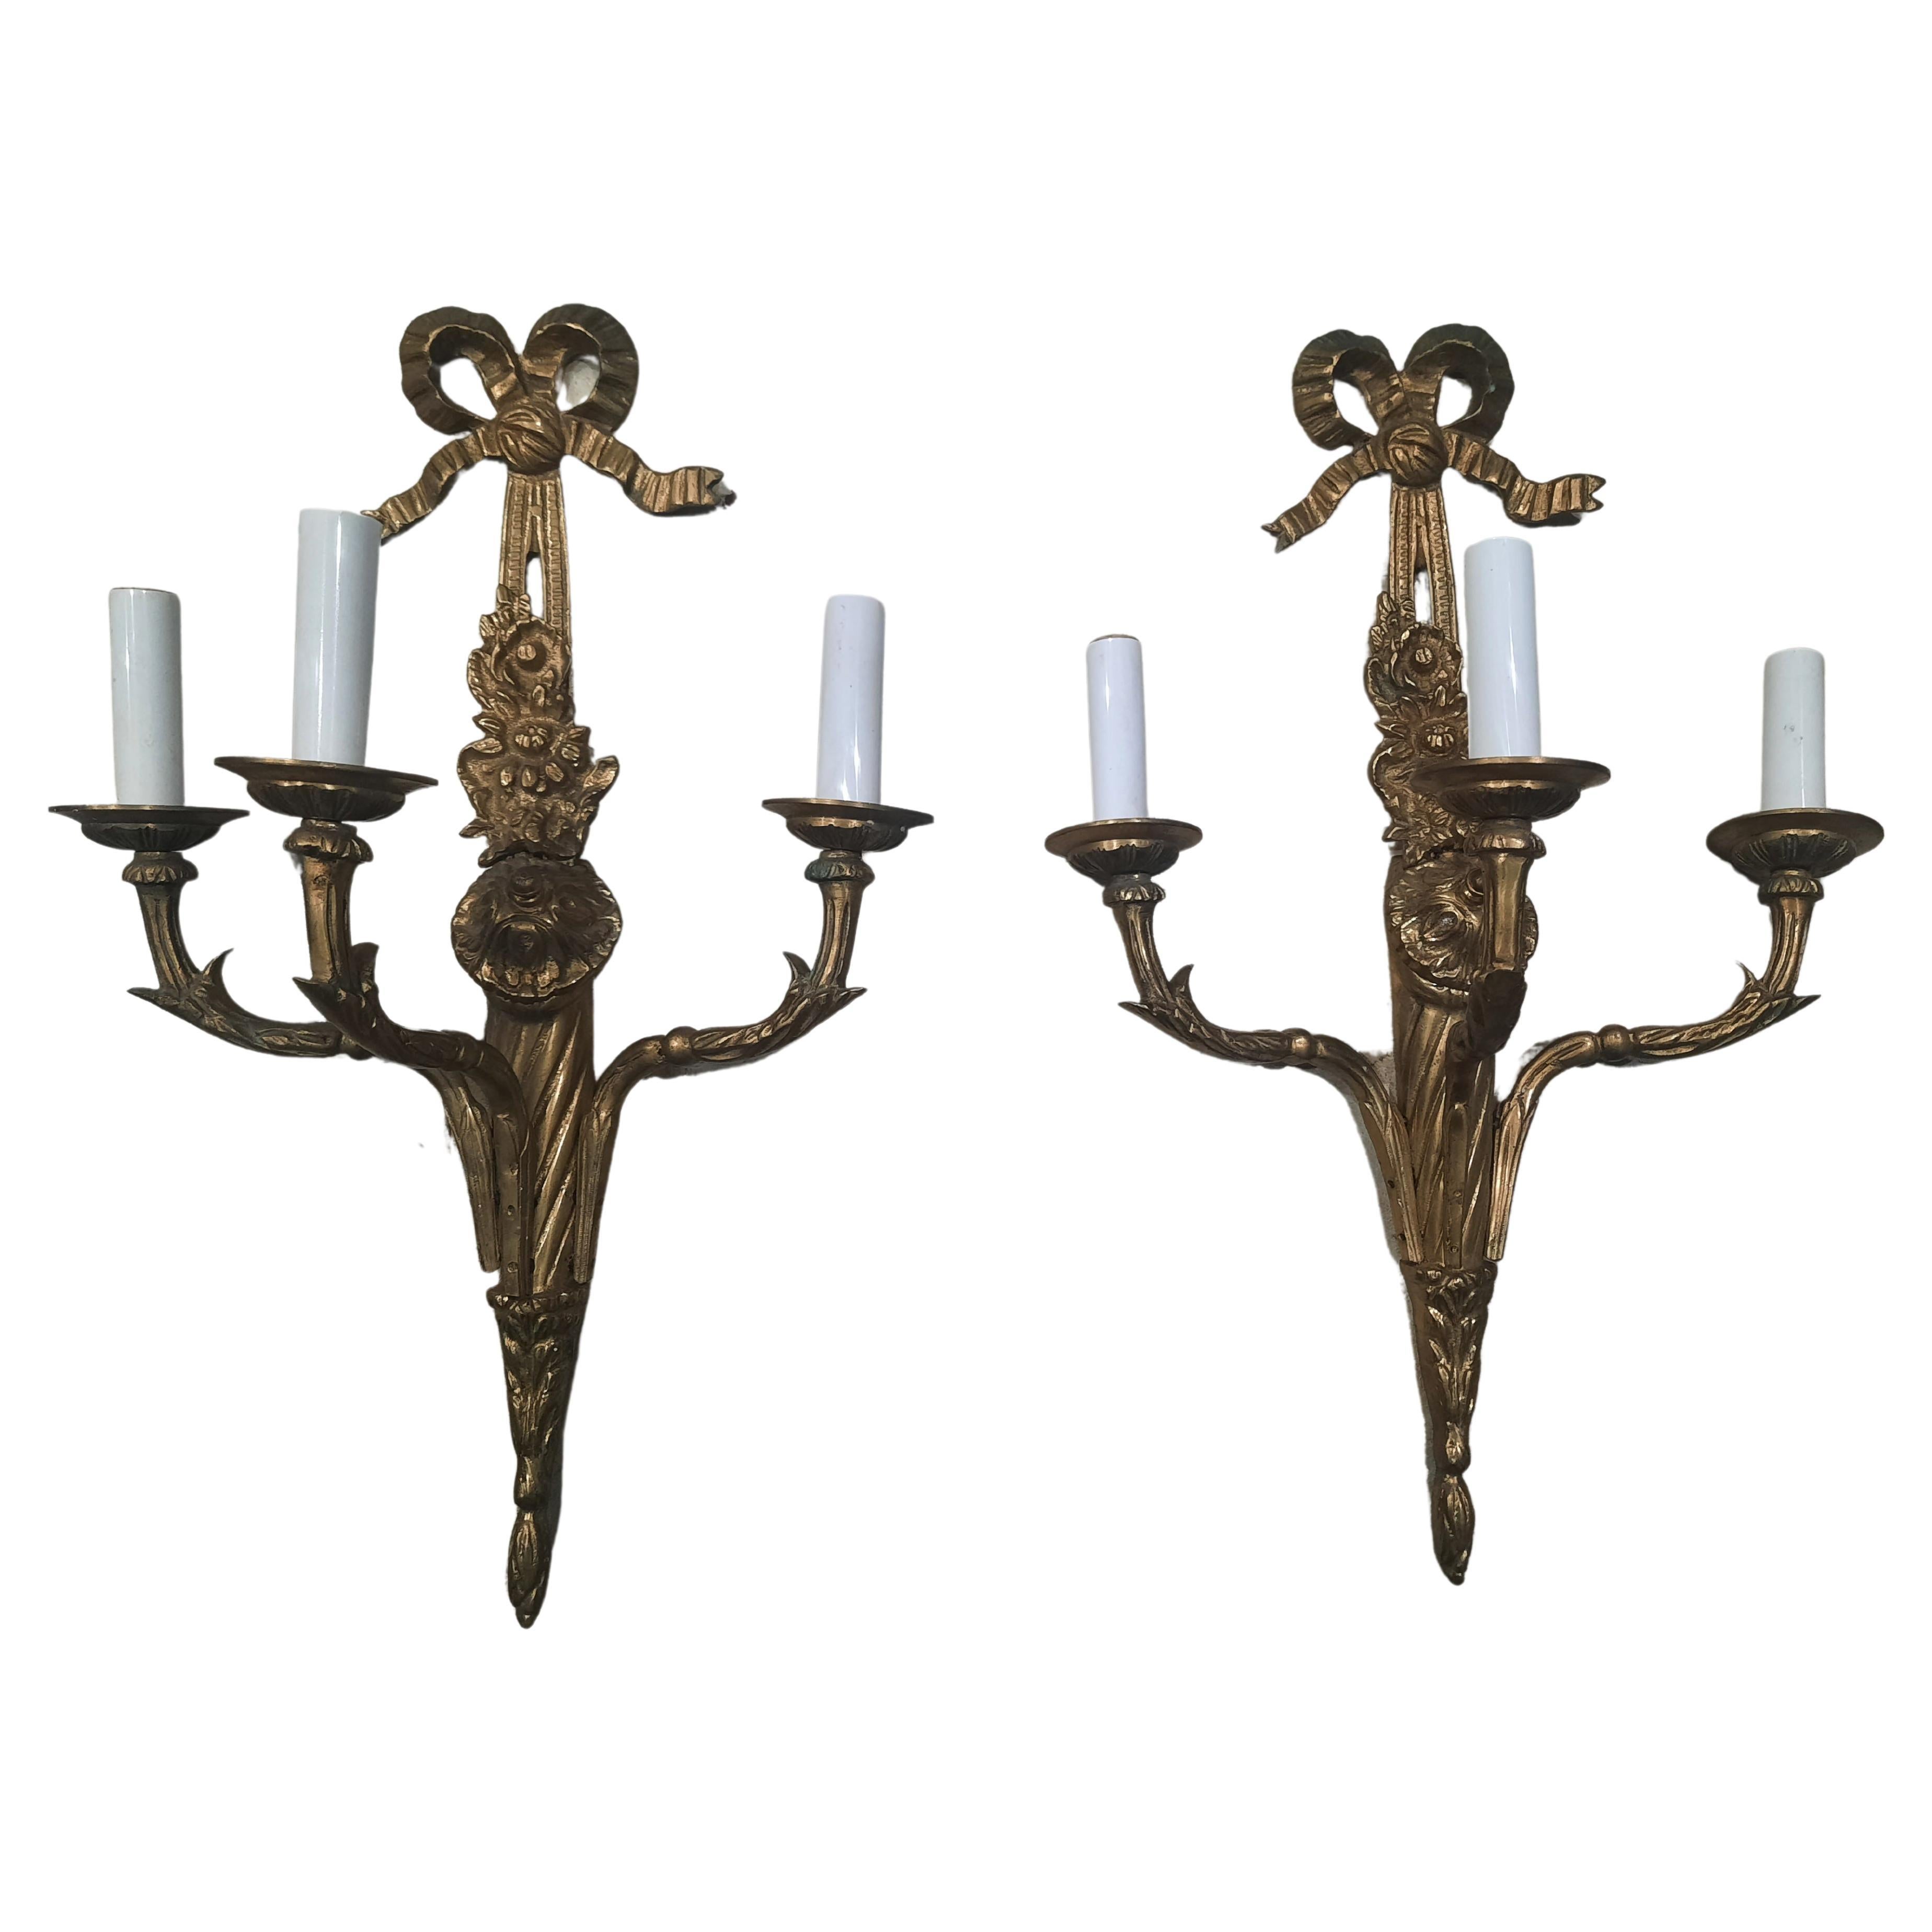 This pair of antique gilt bronze appliqués are finely detailed, and feature neoclassical motifs including bowknots and acanthus leaves. They are electric powered with completely newer sockets.
Measures 13